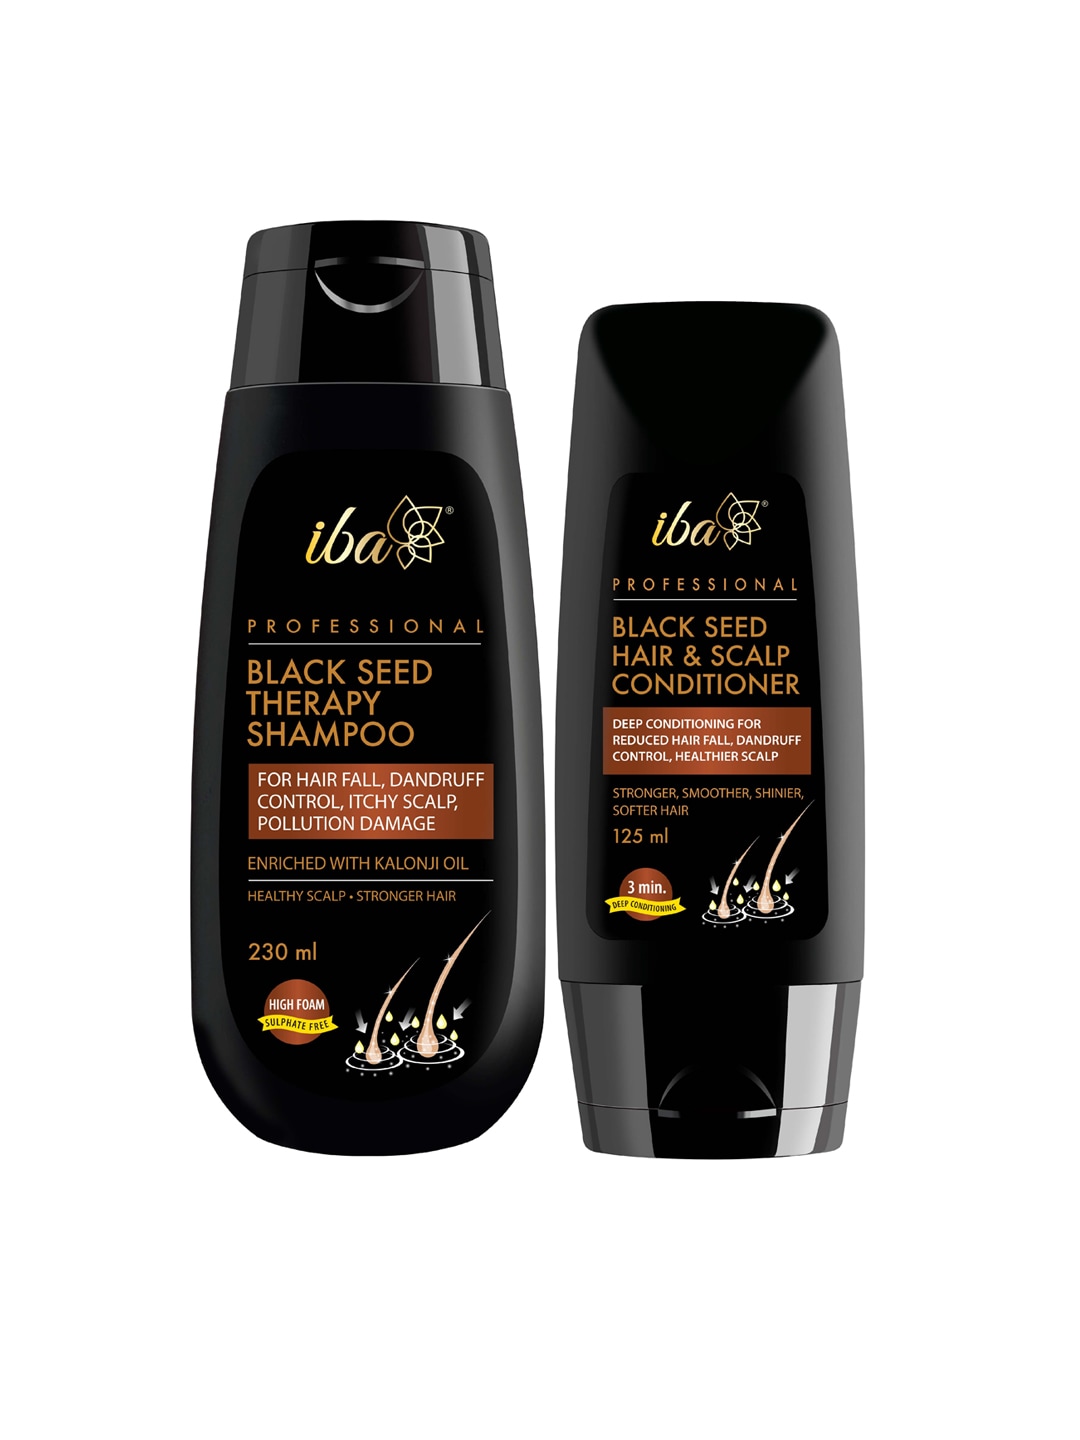 Iba Black Seed Therapy Shampoo + Conditioner Combo Price in India